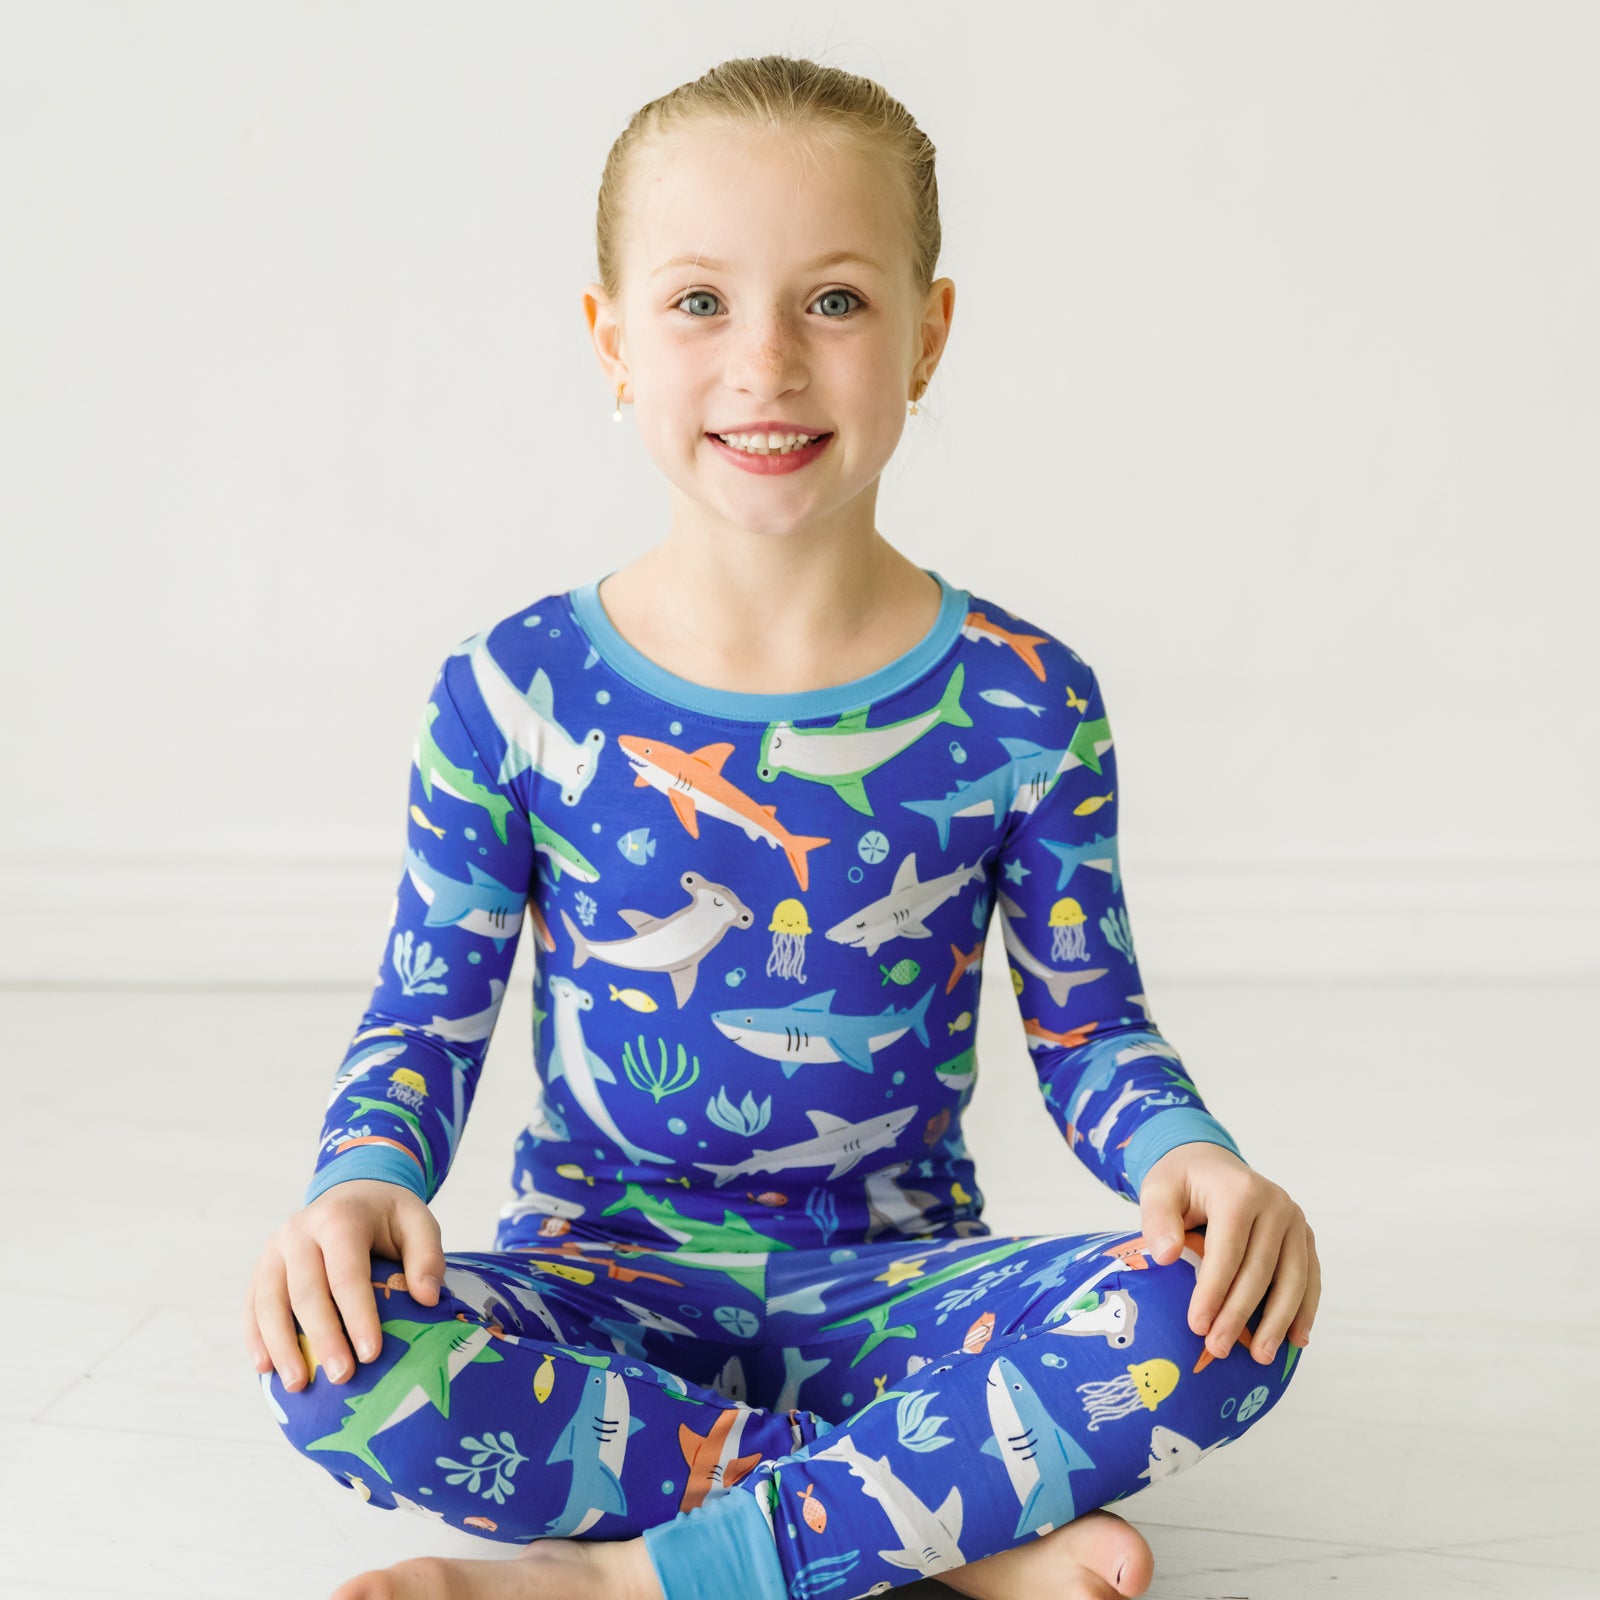 Alternate image of a child sitting on the ground wearing a Rad Reef two-piece pajama set